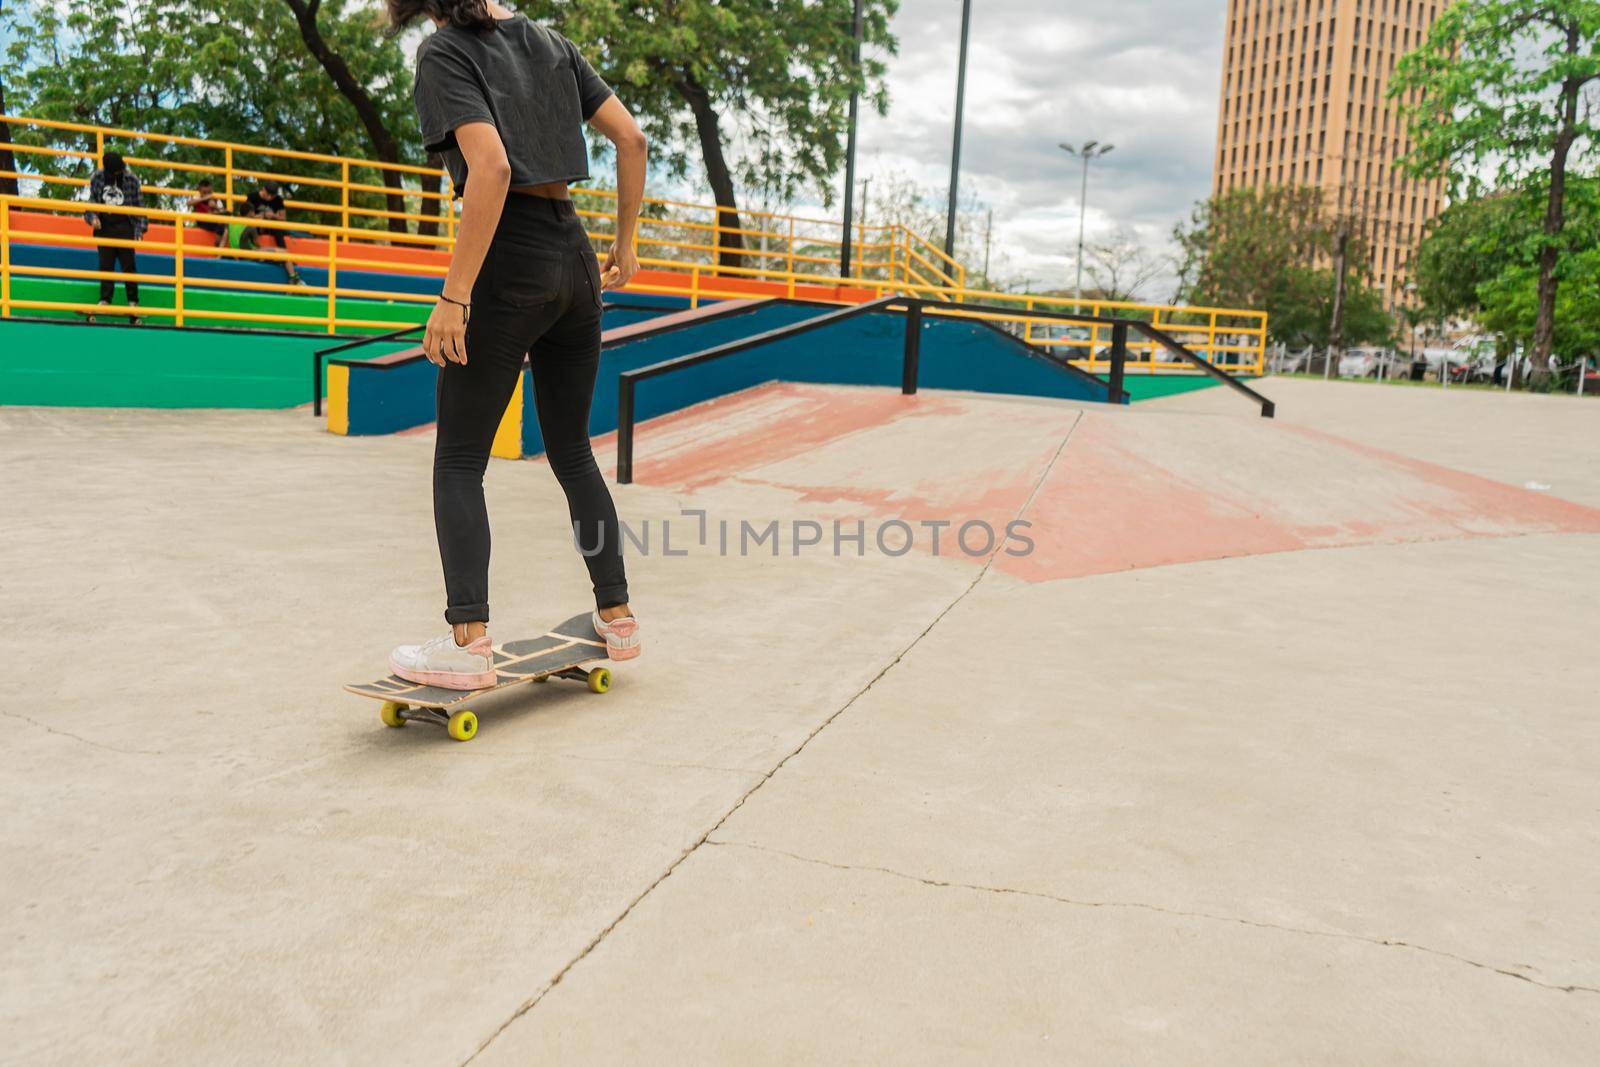 Latina teen woman rollerblading in an outdoor park in Nicaragua by cfalvarez